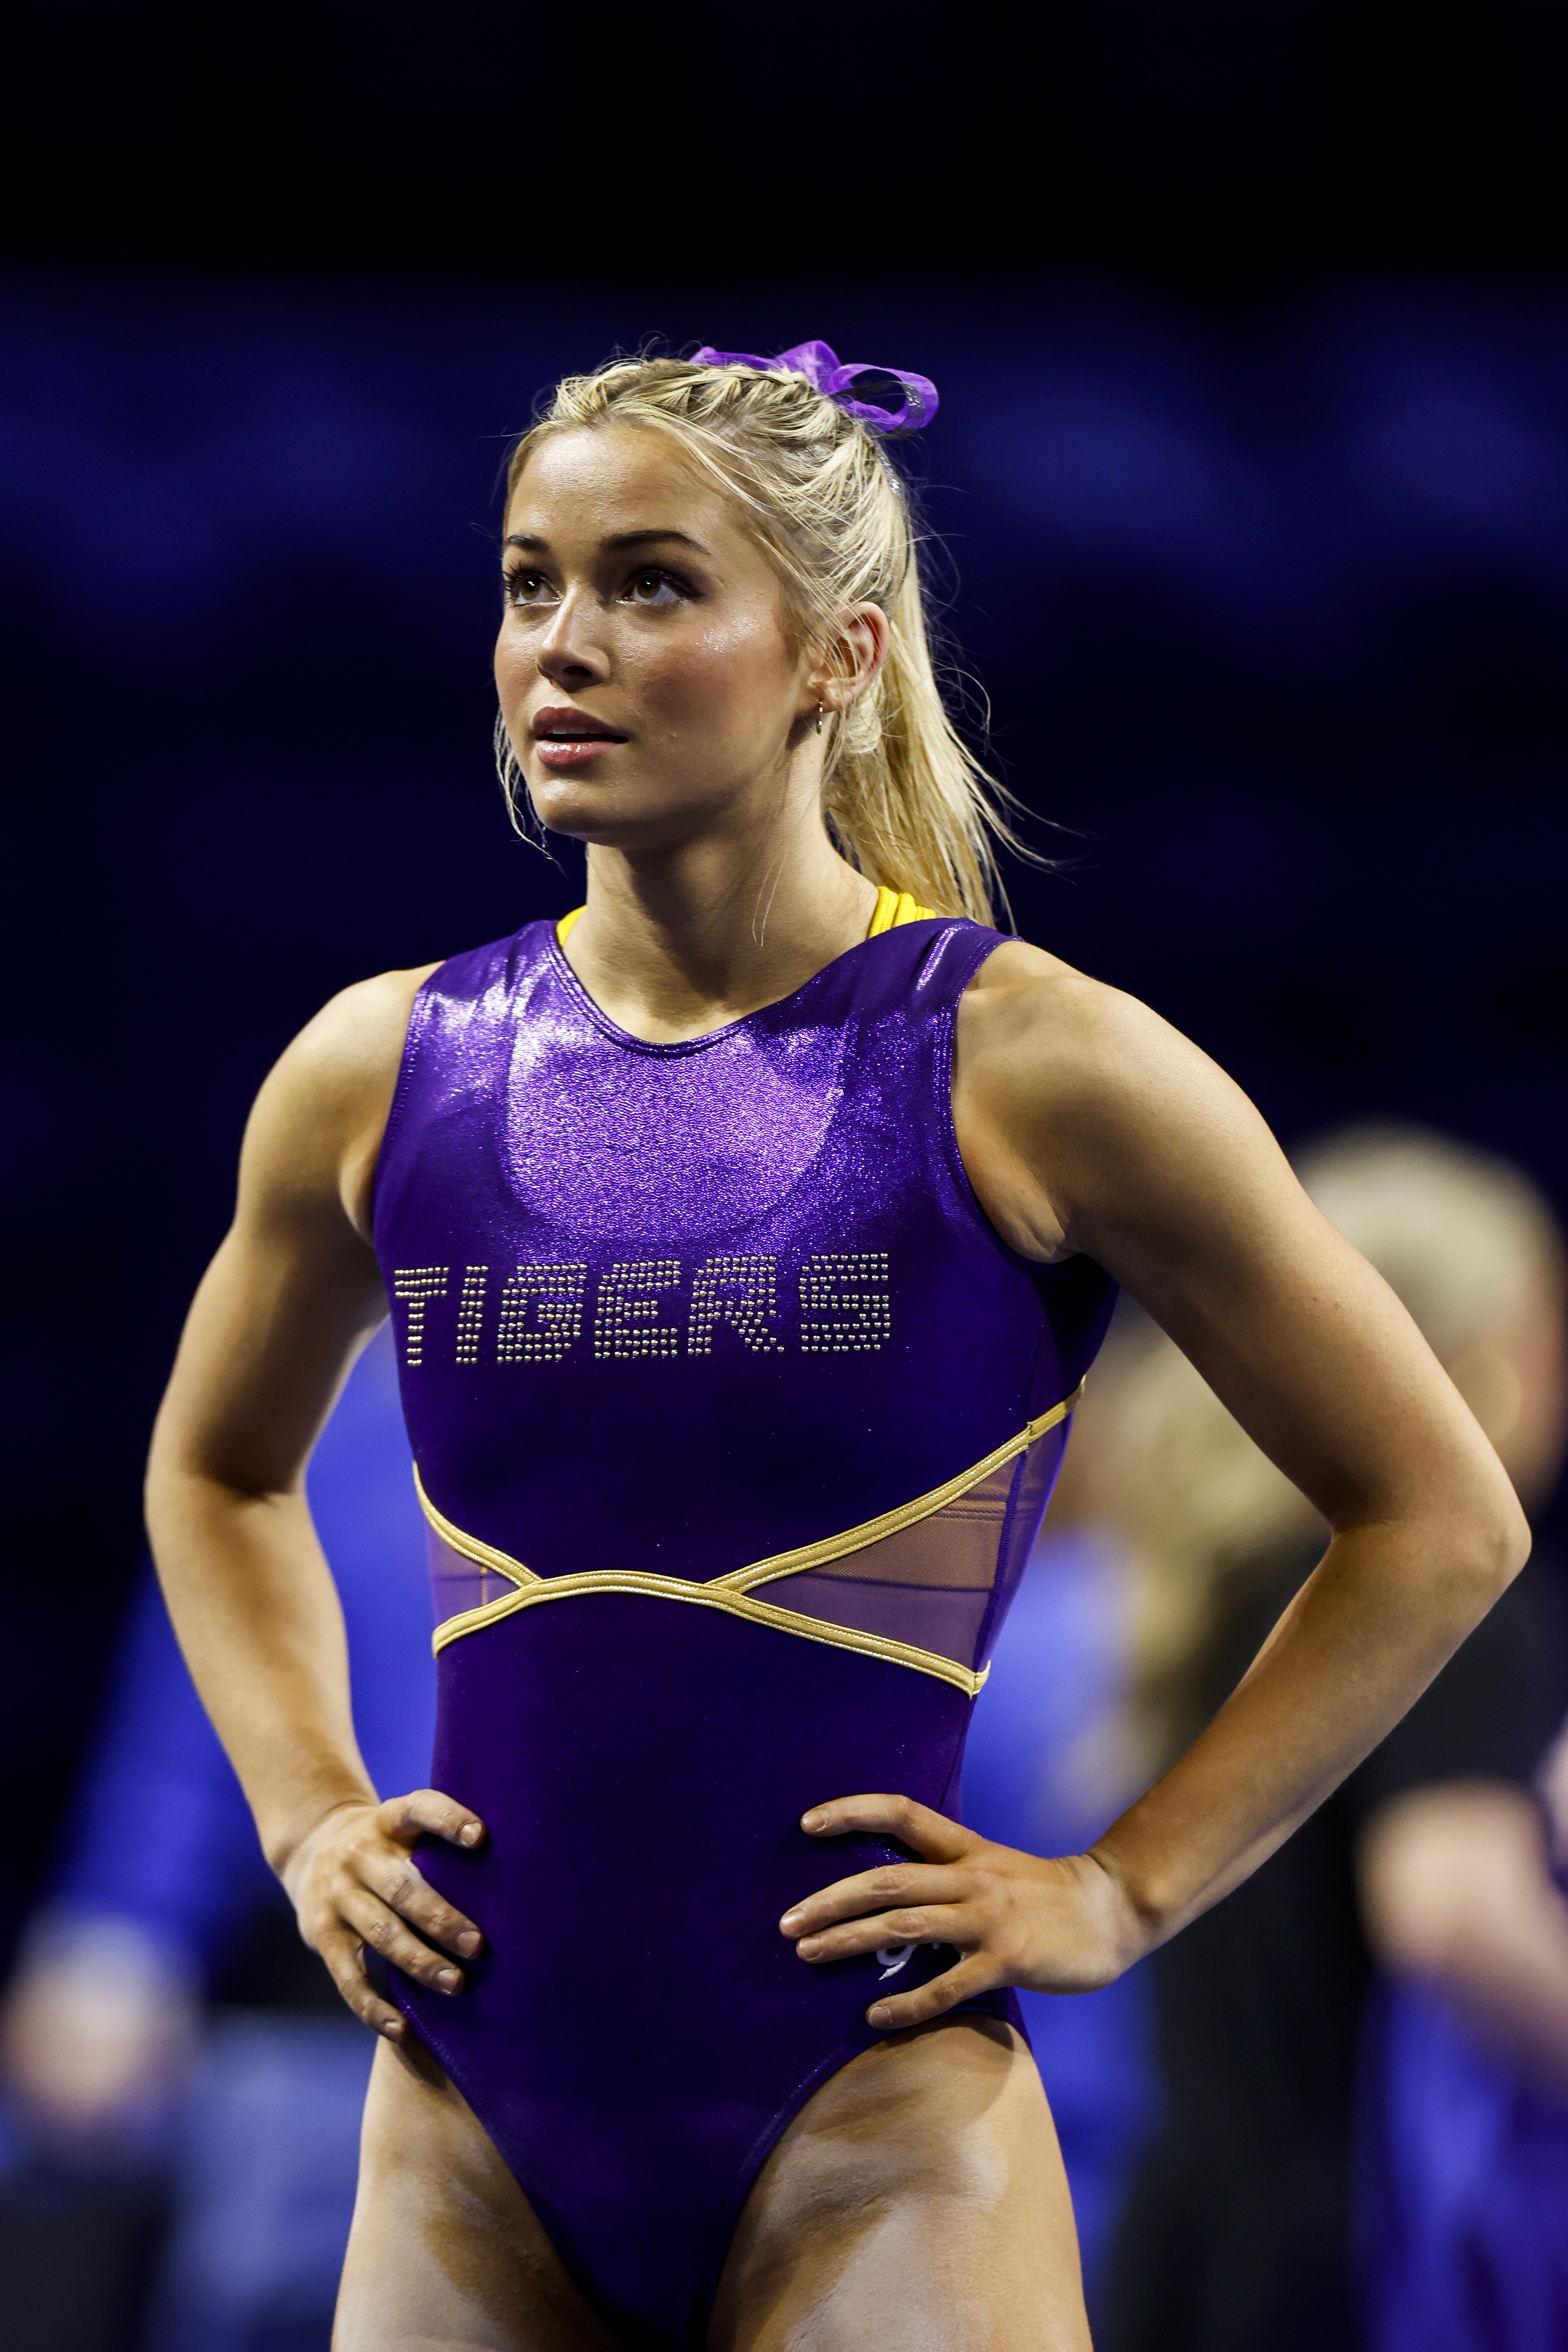 Dunne is a senior at LSU and has 12.4 million followers across all of her social media platforms